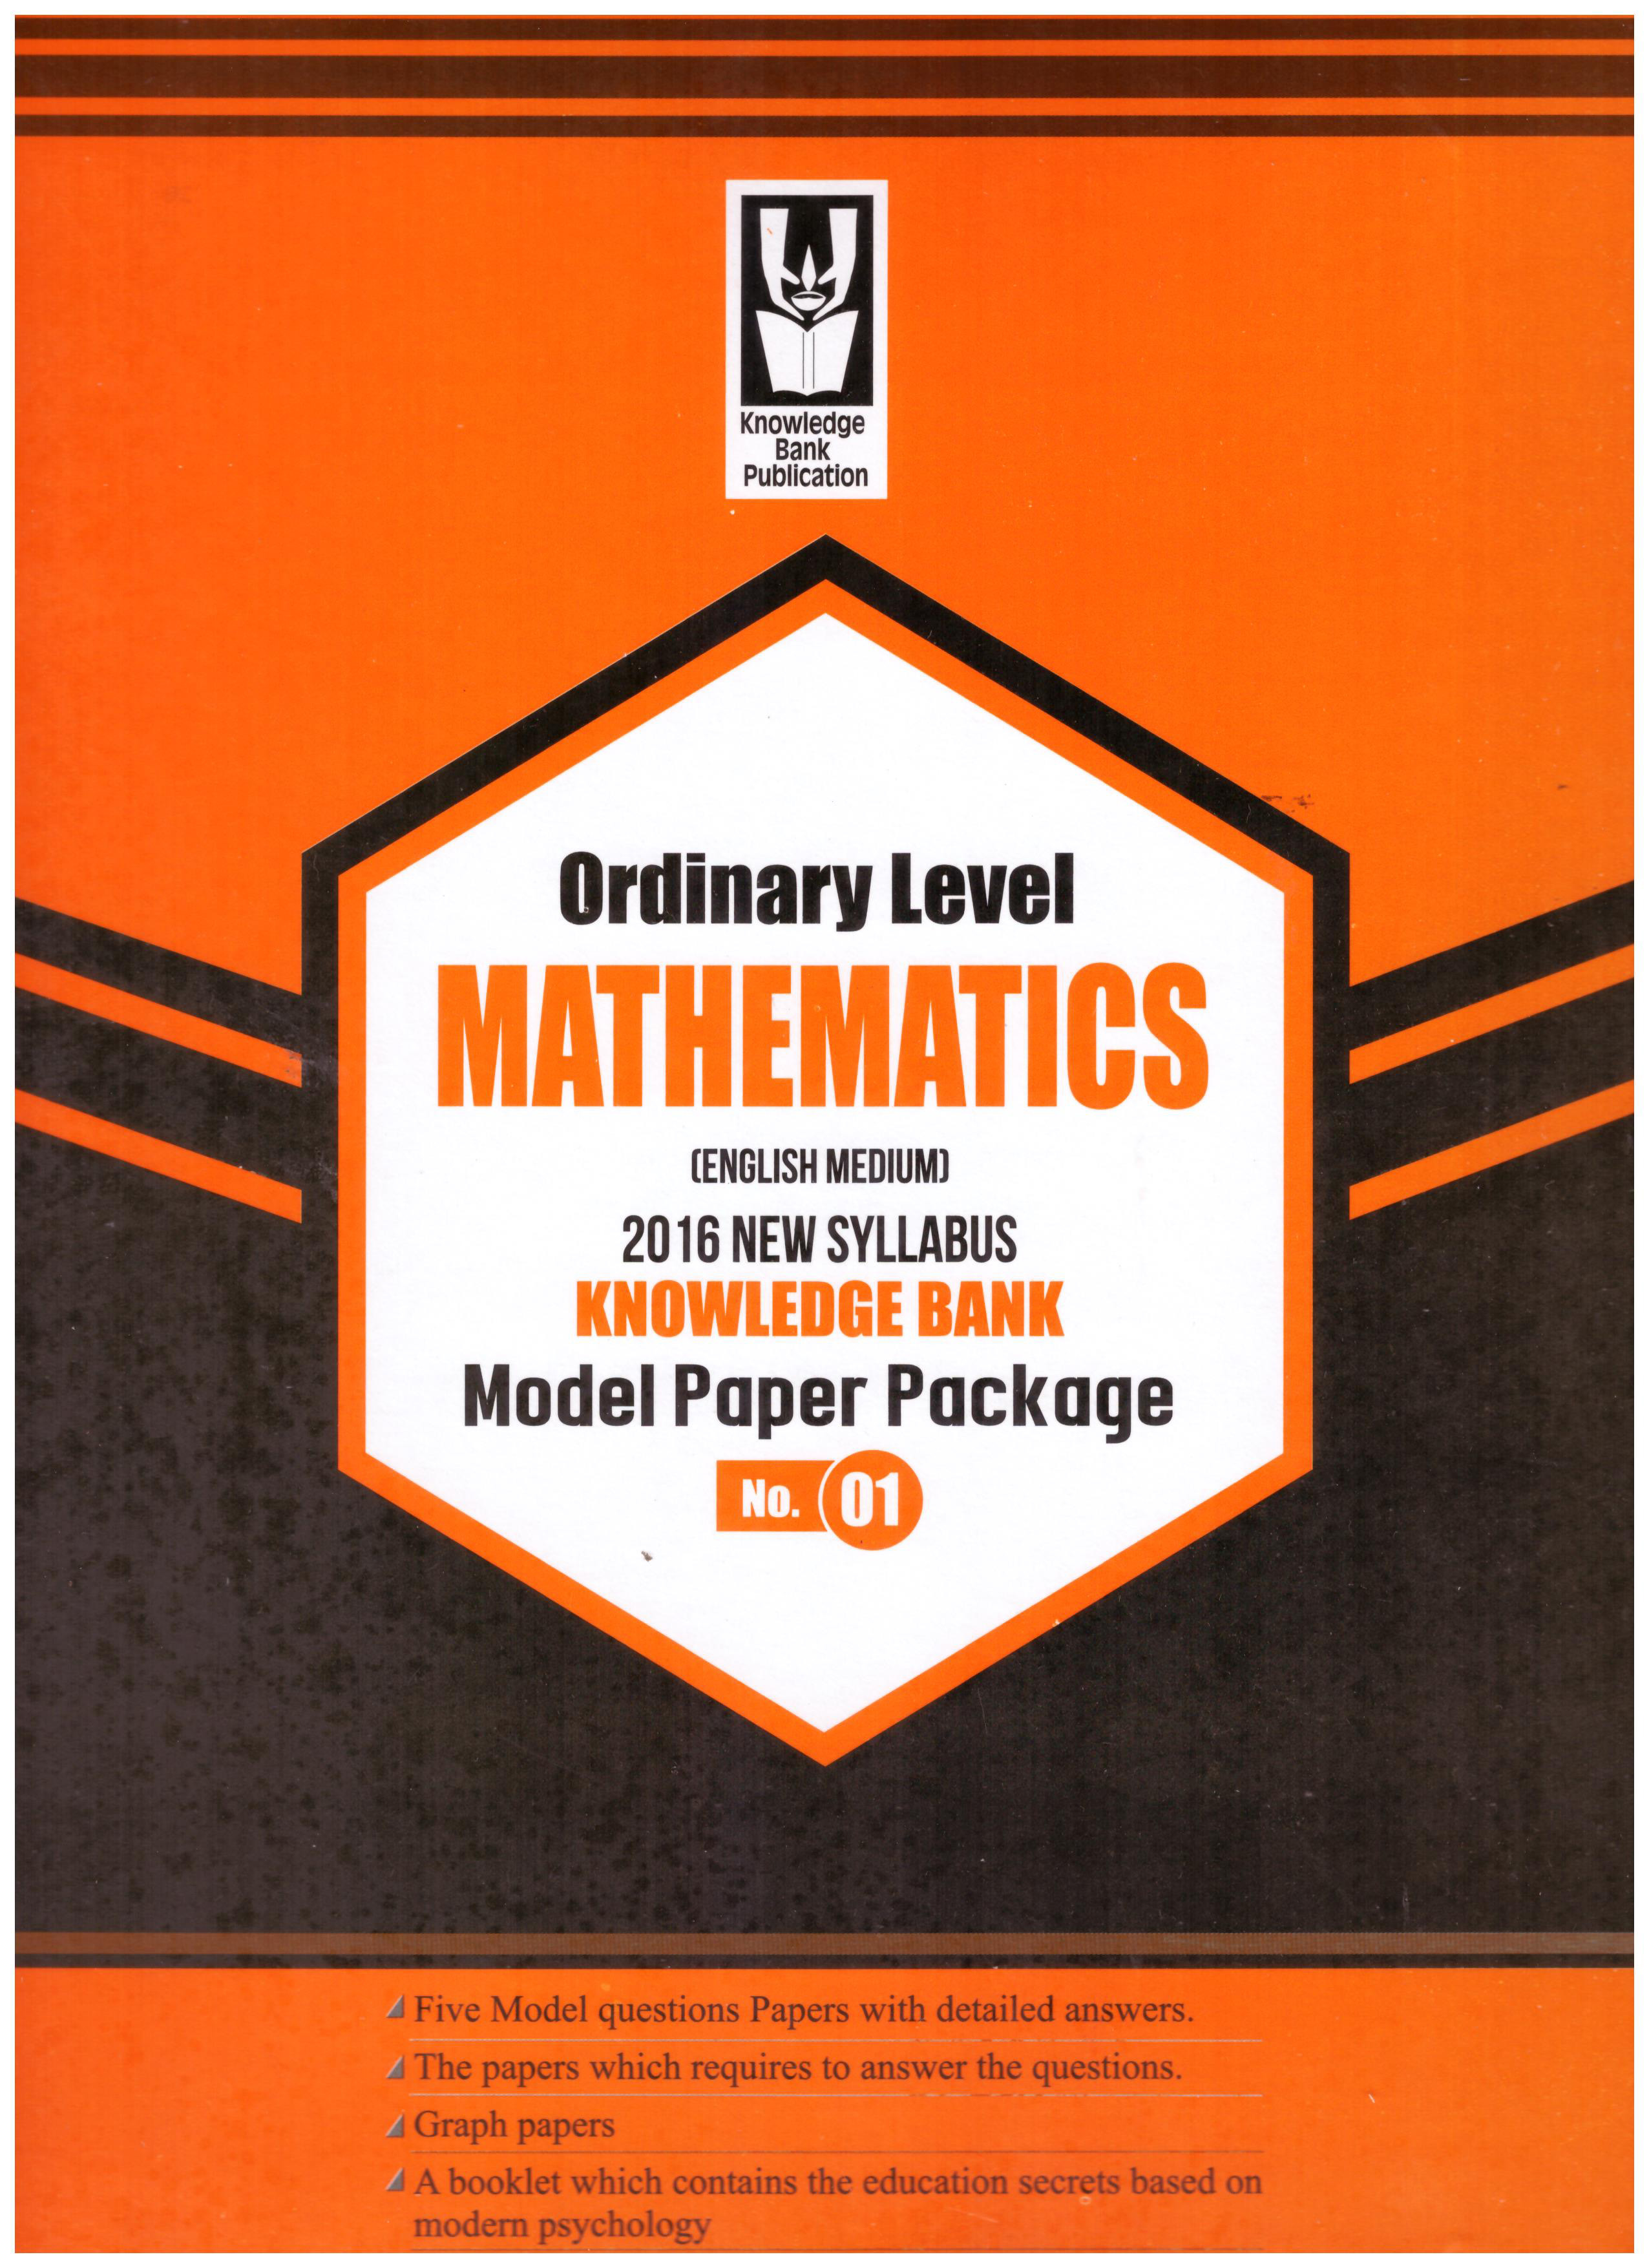 Knowledge Bank O/L Mathematics No.01 Model Paper Package